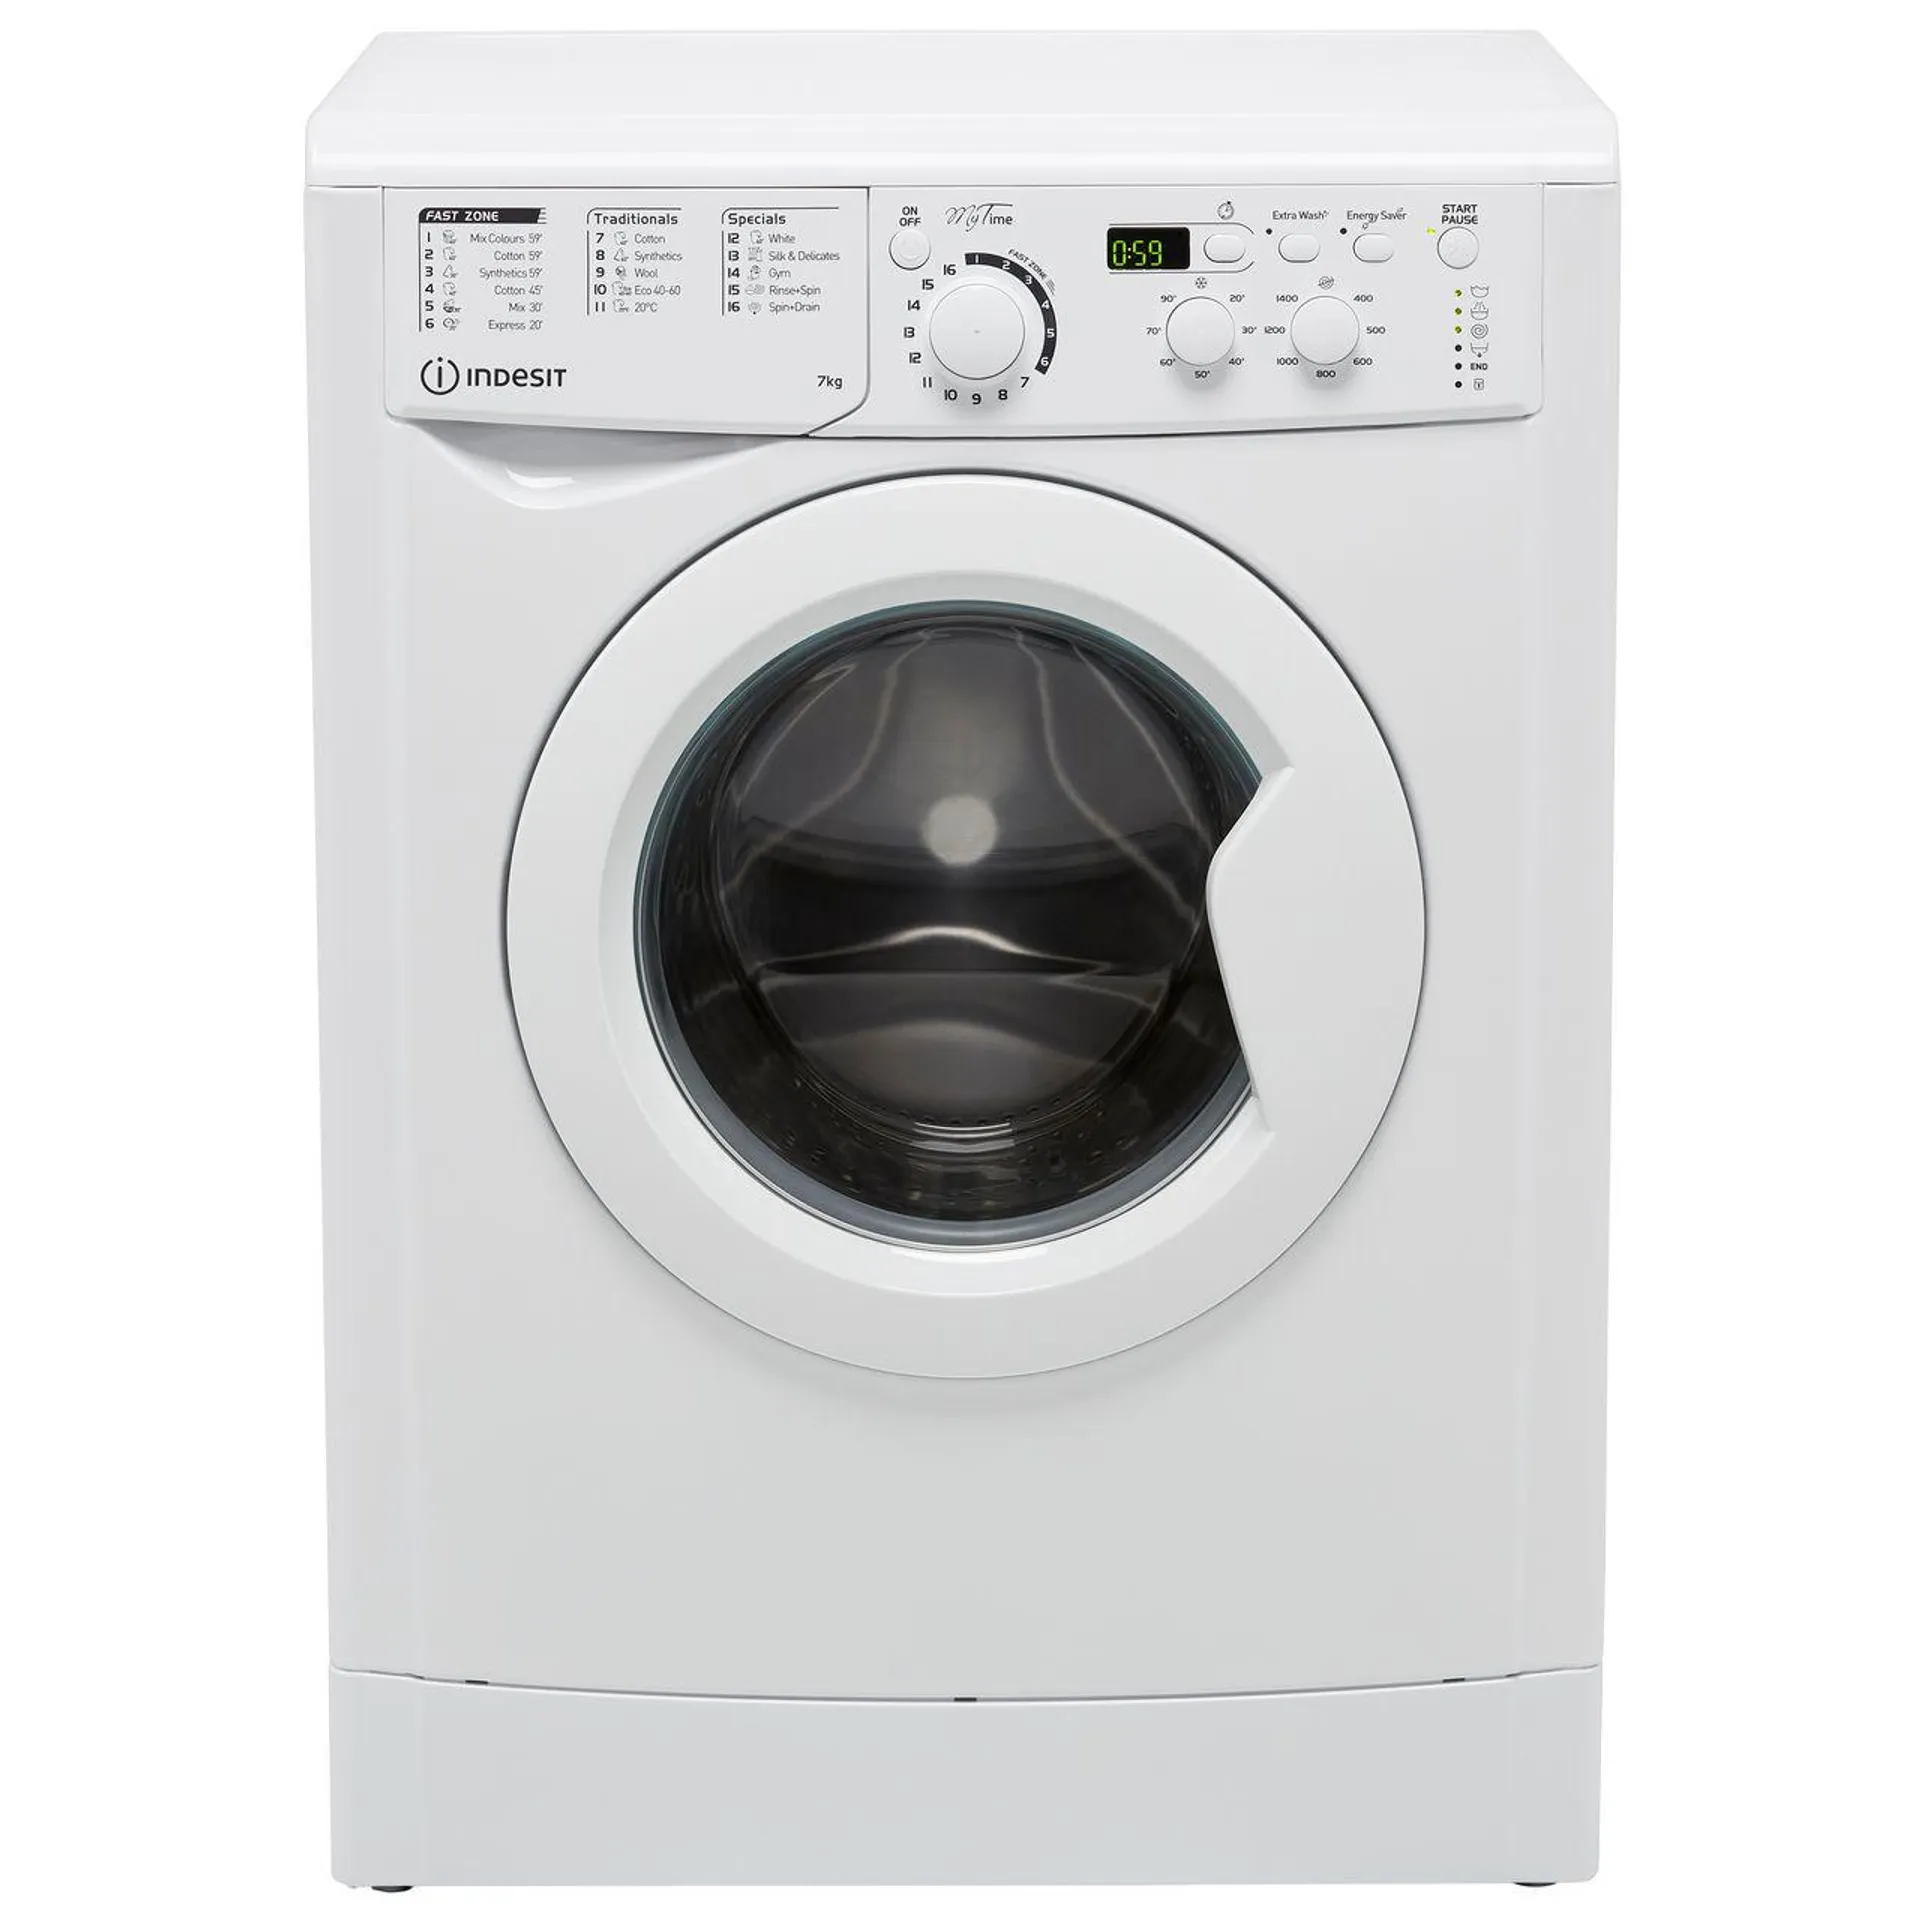 Indesit My Time EWD71453WUKN 7kg Washing Machine with 1400 rpm - White - D Rated